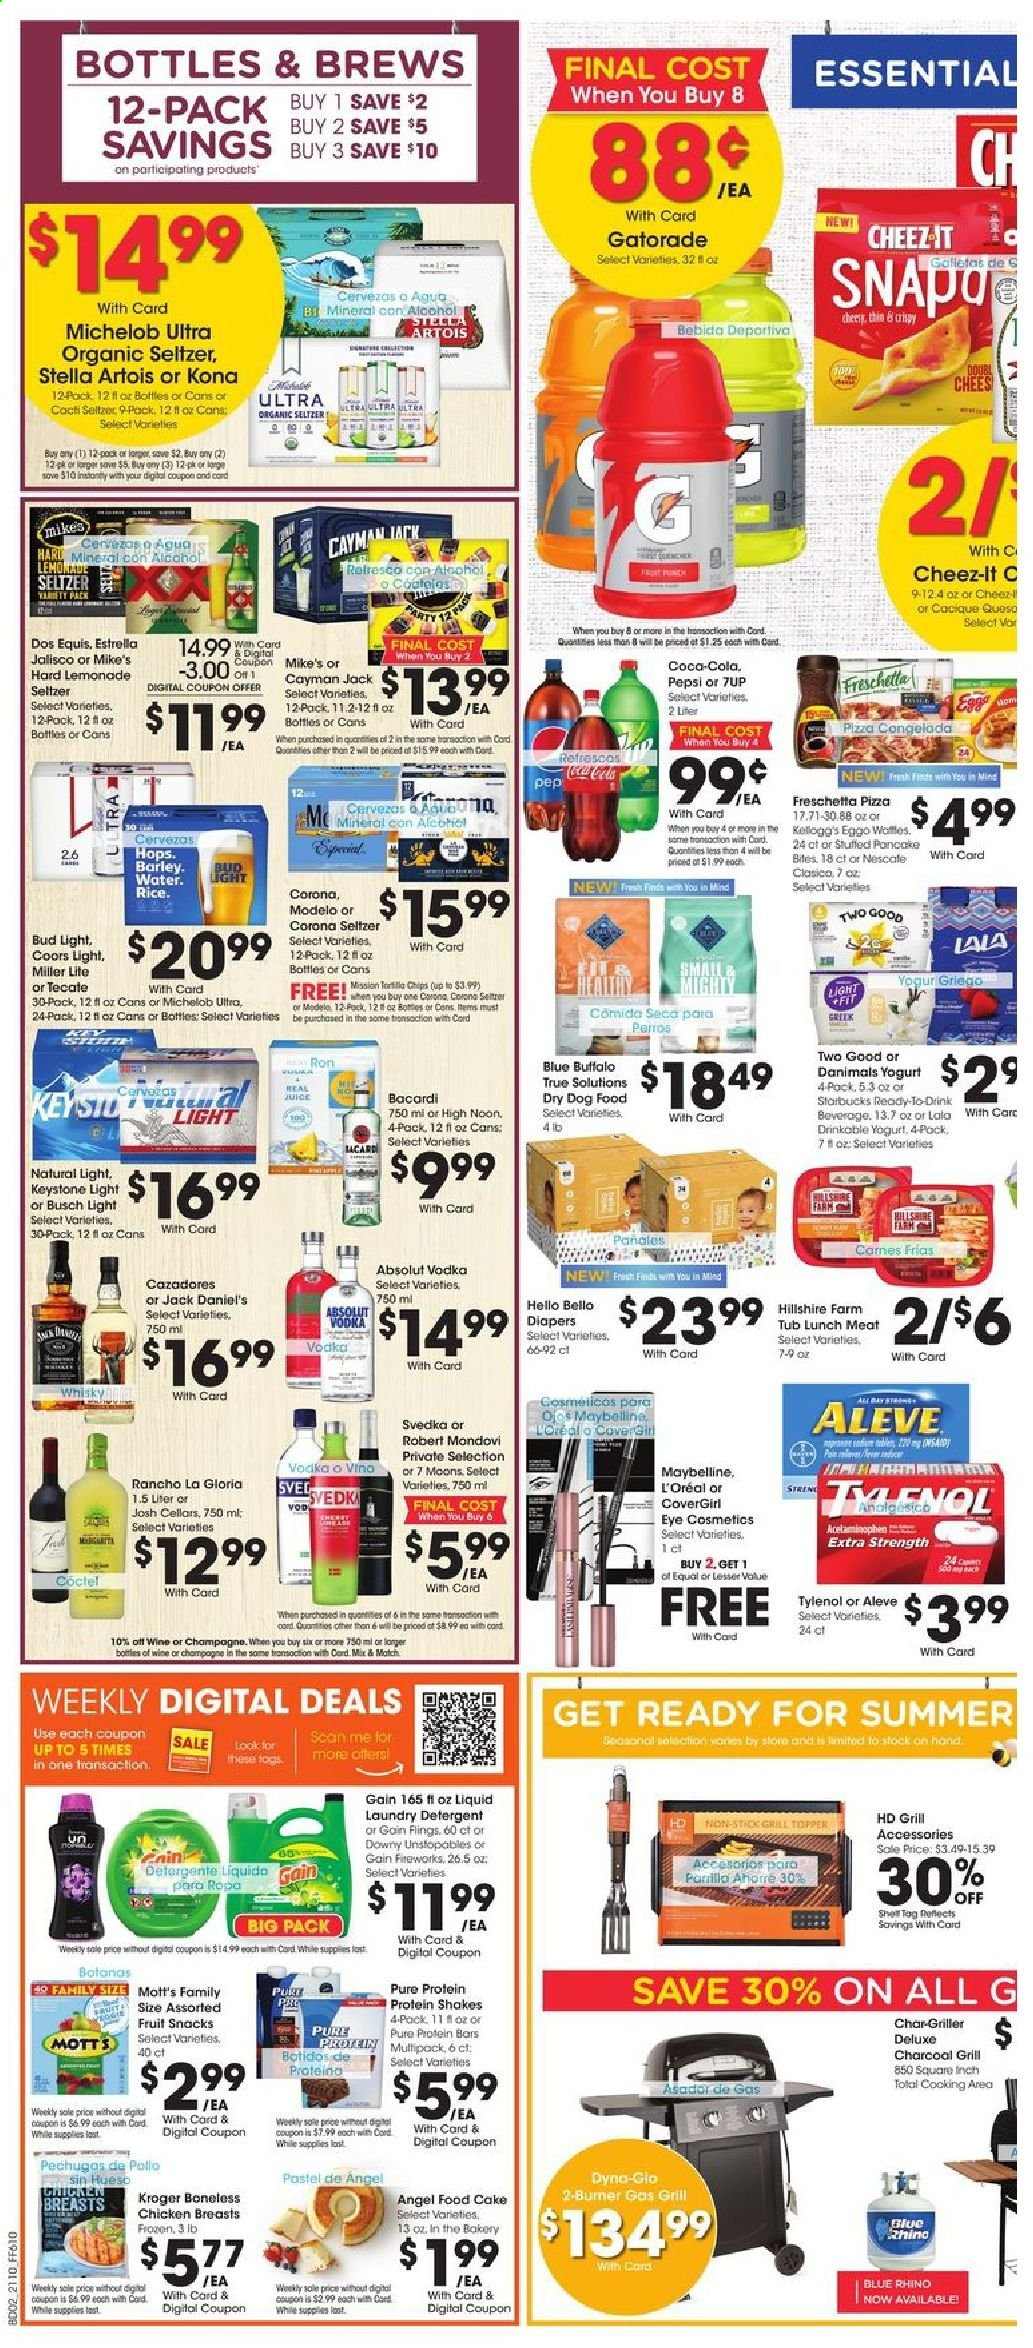 thumbnail - Fry’s Flyer - 04/07/2021 - 04/13/2021 - Sales products - cake, Angel Food, Jack Daniel's, pizza, Hillshire Farm, lunch meat, yoghurt, Danimals, protein drink, shake, fruit snack, Cheez-It, protein bar, Coca-Cola, lemonade, Pepsi, 7UP, Mott's, Gatorade, seltzer water, champagne, wine, Bacardi, gin, vodka, Absolut, Ron Pelicano, whisky, beer, Miller Lite, Stella Artois, Coors, Dos Equis, Michelob, Busch, Bud Light, Corona Extra, Keystone, Modelo, chicken breasts, nappies, detergent, Gain, Unstopables, laundry detergent, L’Oréal, Maybelline, topper, animal food, Blue Buffalo, dog food, dry dog food, lens, Aleve, Tylenol. Page 5.